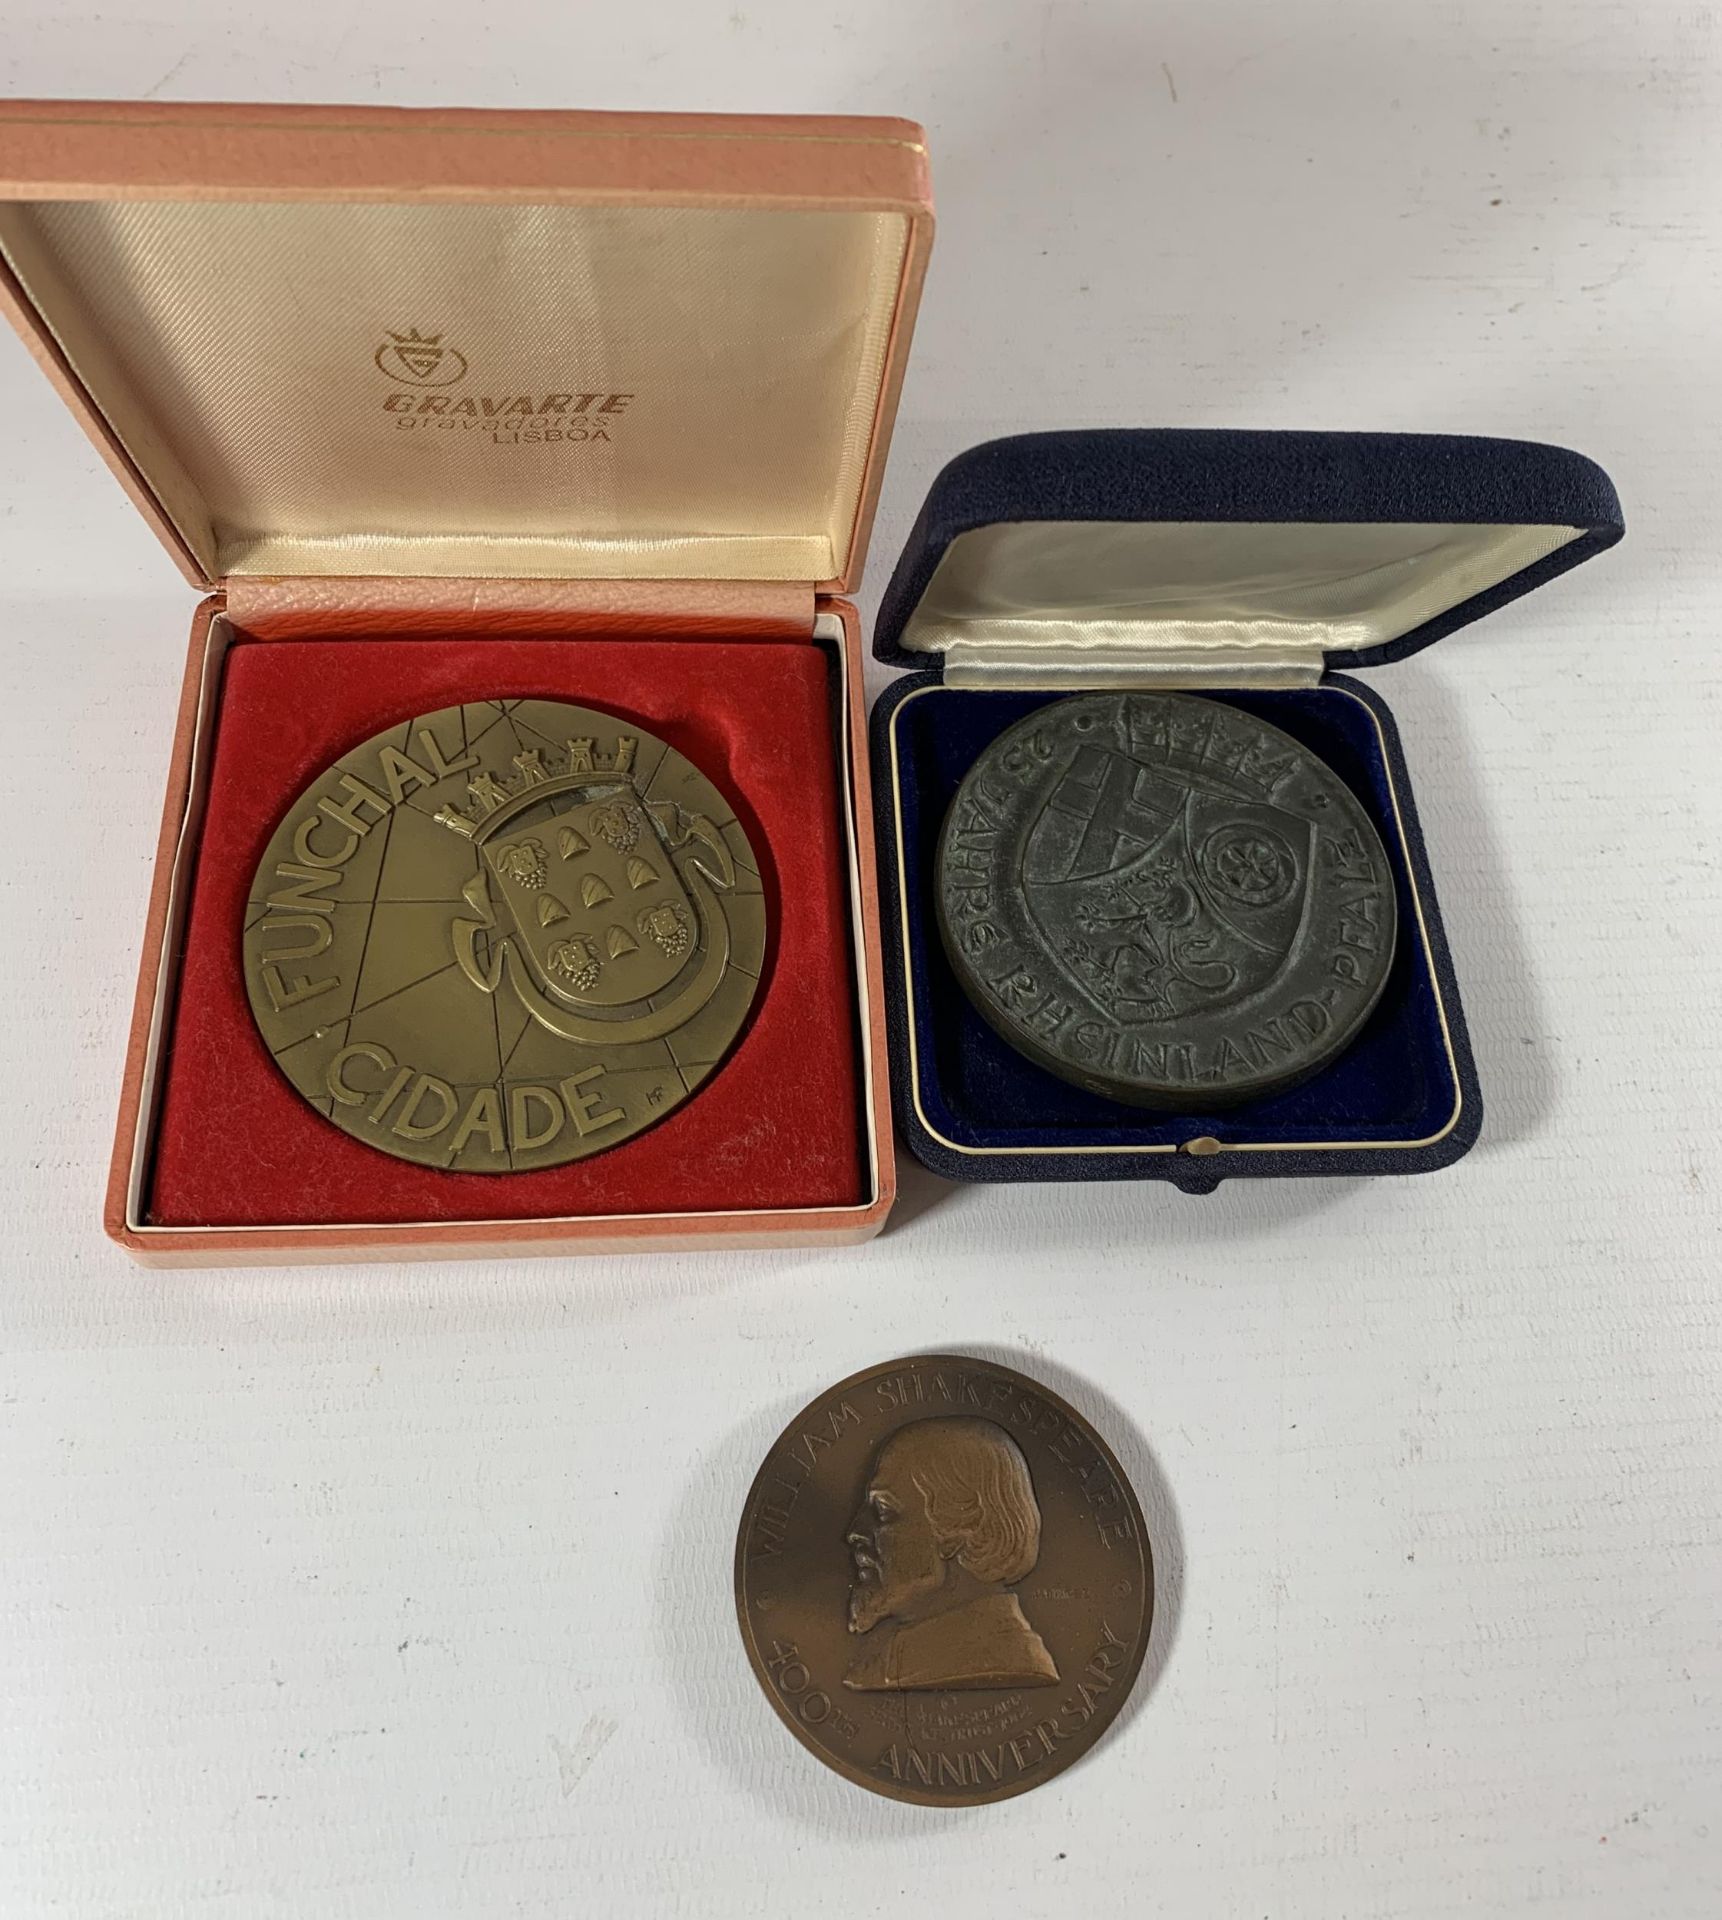 * A LARGE CASED PORTUGUESE BRONZE MEDAL AND A LARGE GERMAN BRONZE MEDAL AND A SHAKESPEARE MEDAL (3)